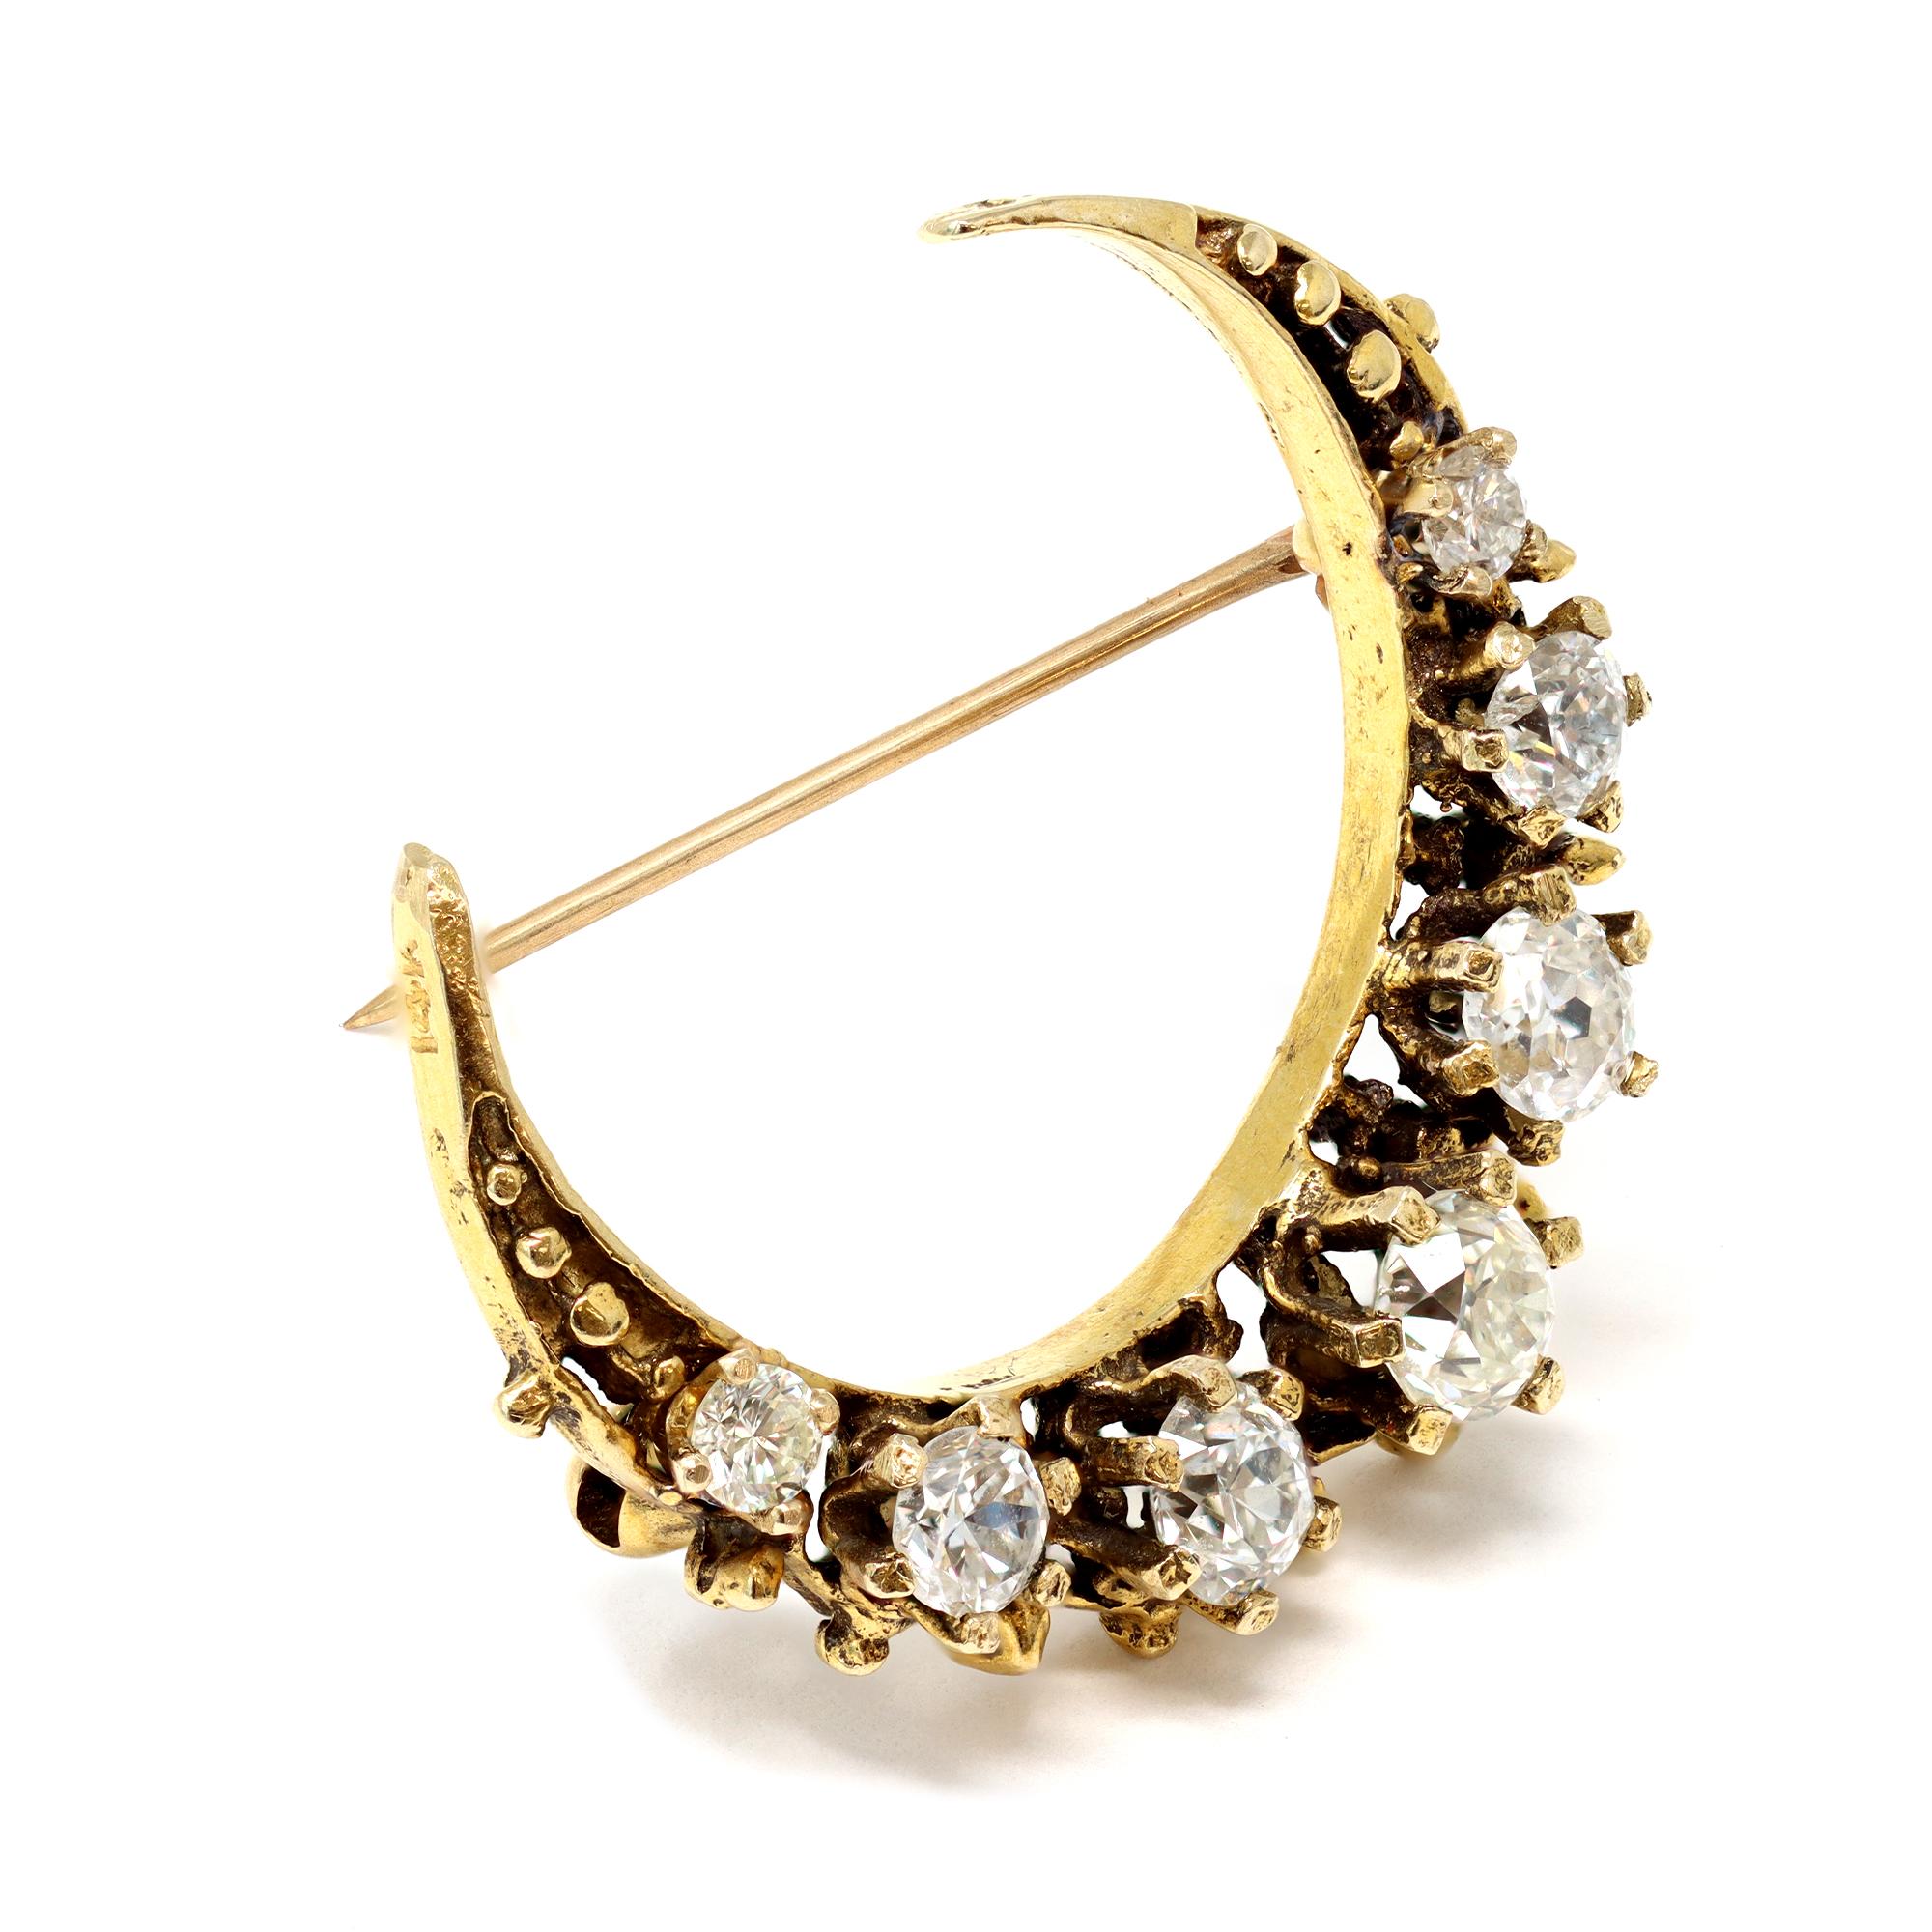 A staple of the Victorian jewelry, this crescent is a perfect example of gold craft from that period circa 1890-1900. The crescent is made in 14-karat yellow gold and features 7 graduated old mine-cut diamonds prong set. The estimated weight of the